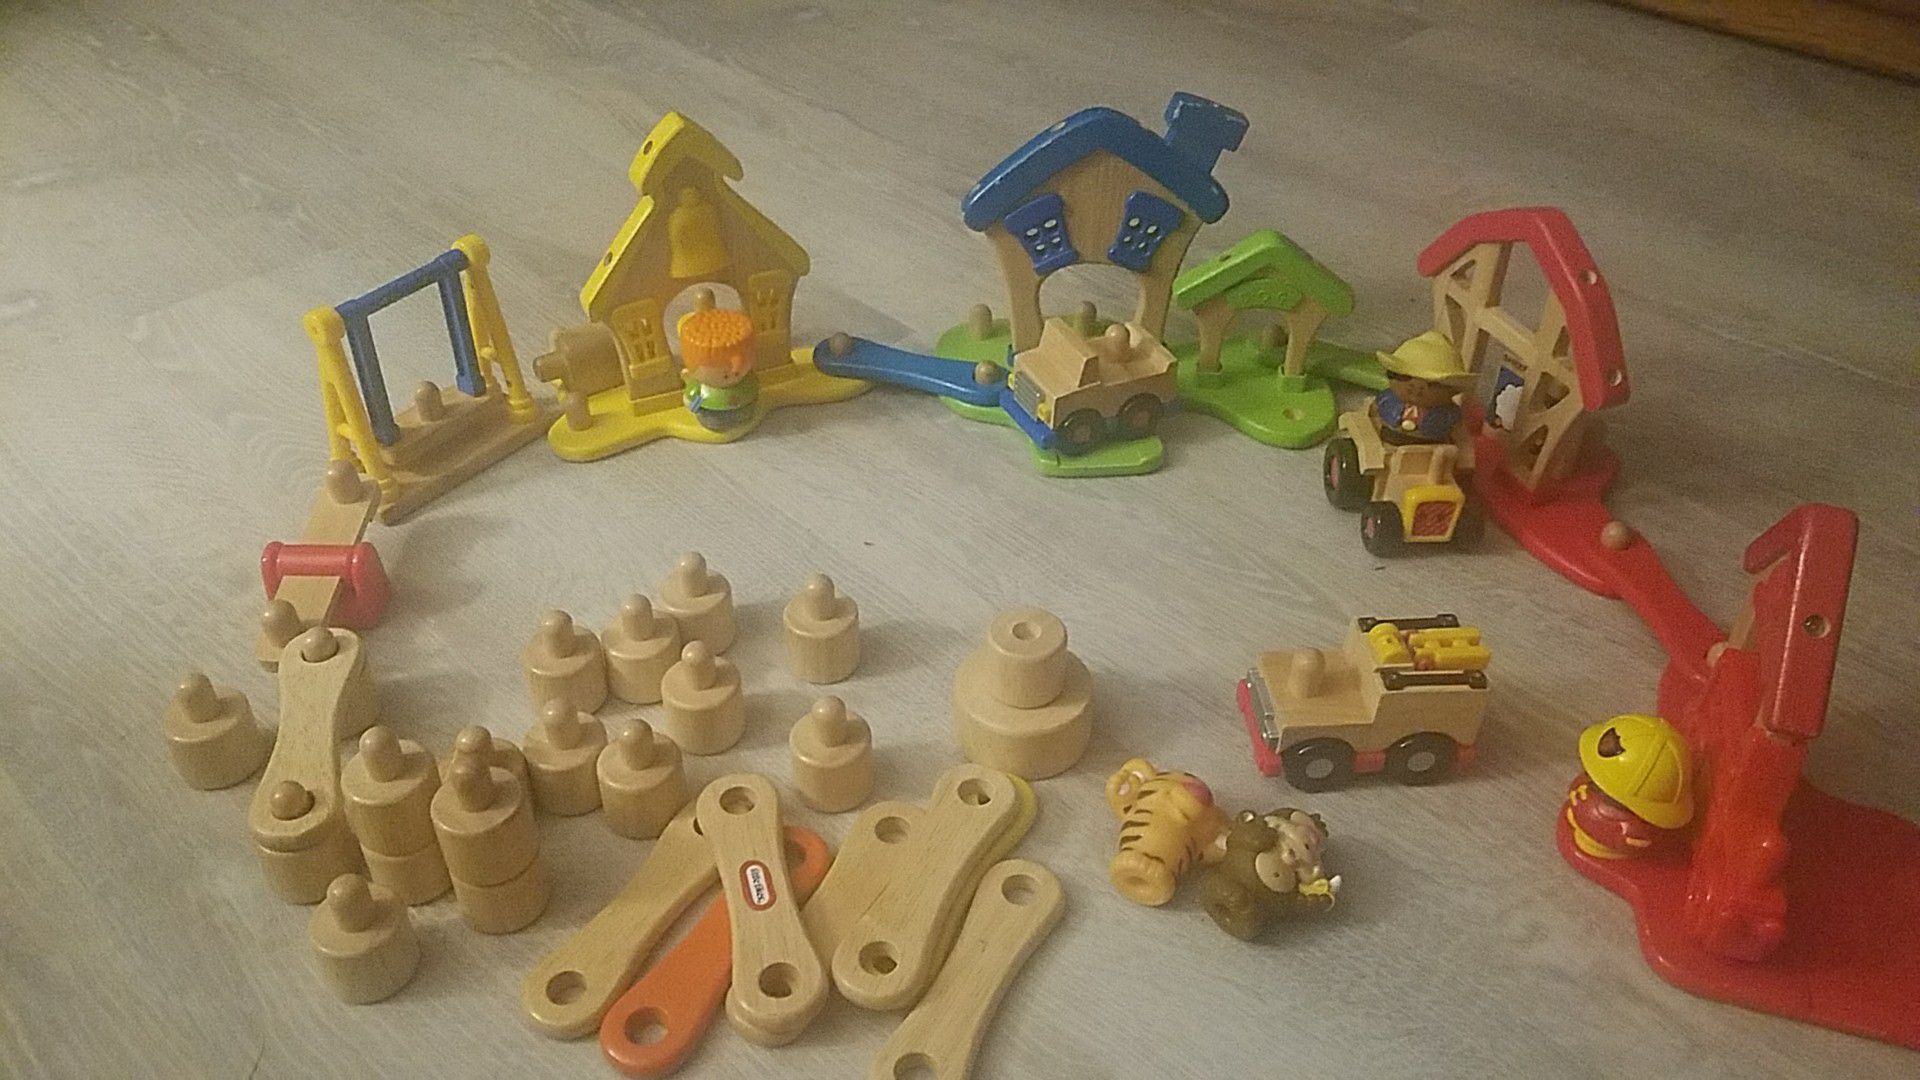 Little Tikes Timber Town with fire truck people and vehicles